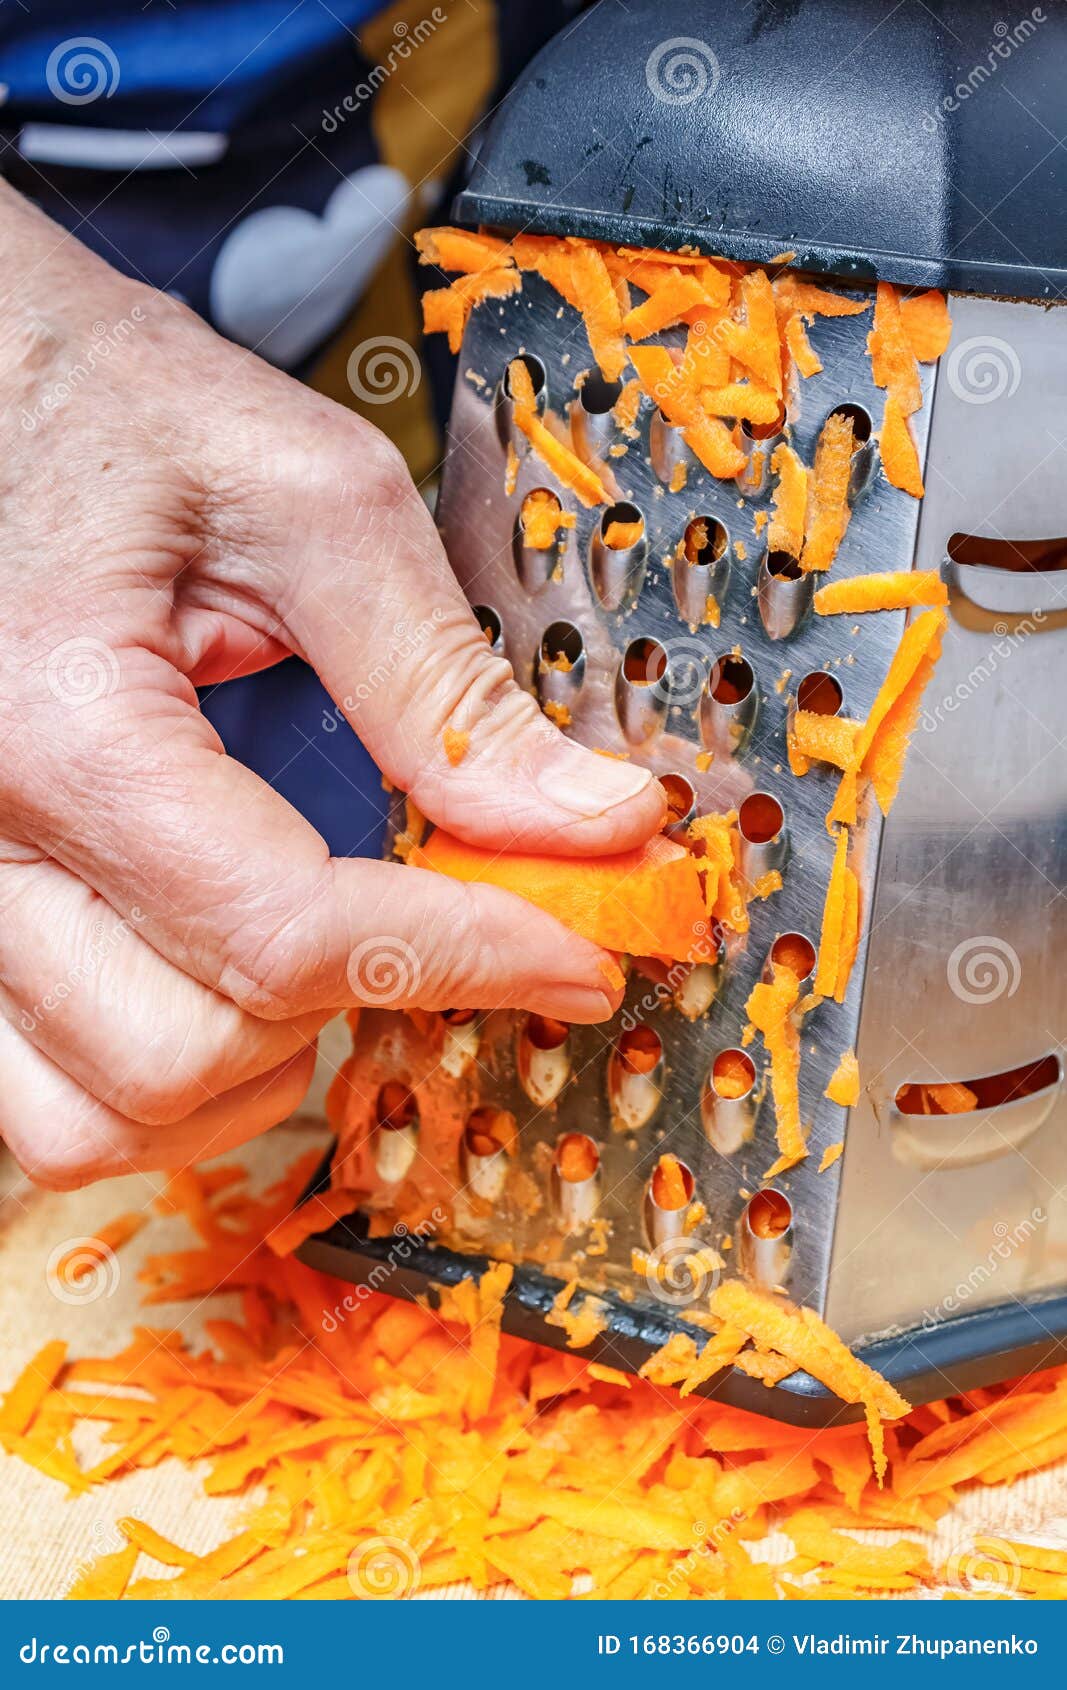 Woman Hand Grating Fresh Bright Orange Carrot on the Stainless Steel ...